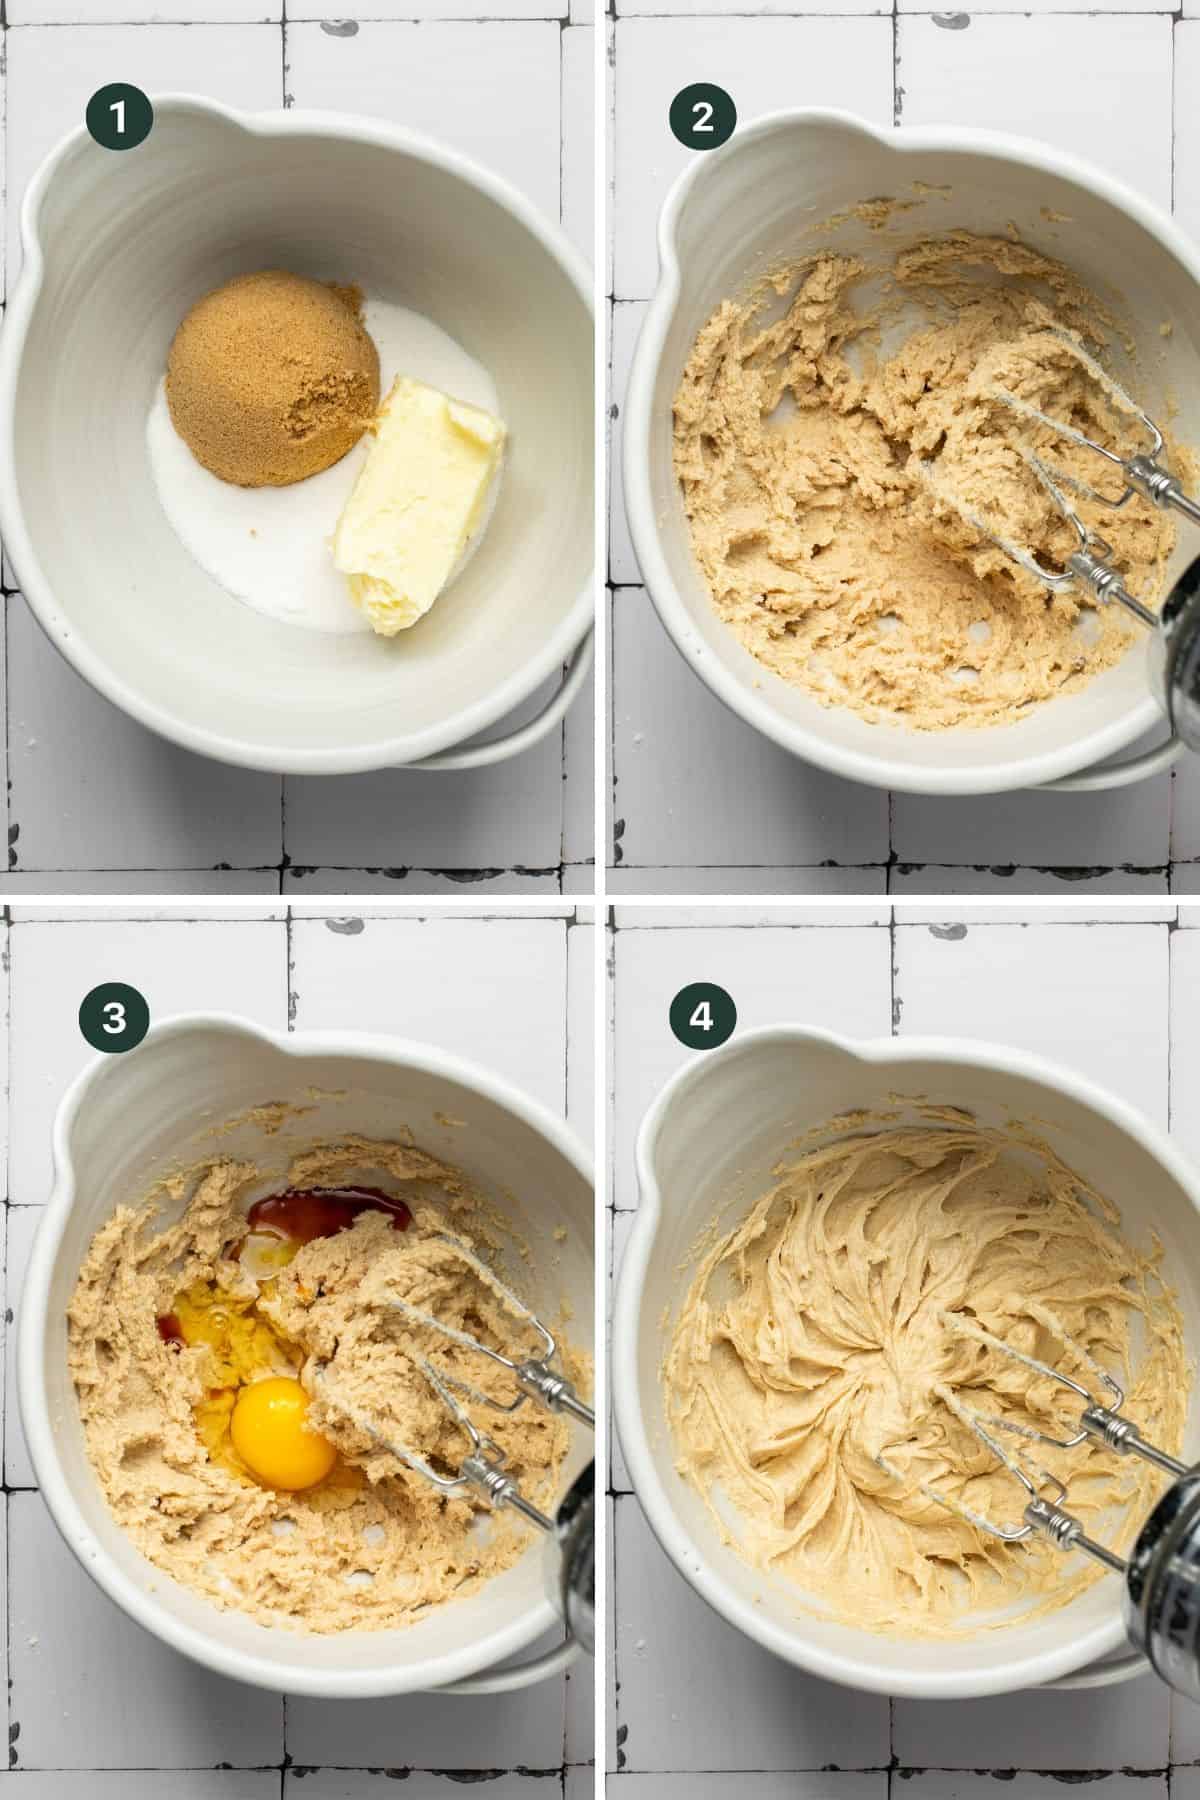 4 images showing adding the butter and sugar to a bowl and creaming together then adding the egg and vanilla and mixing to combine.